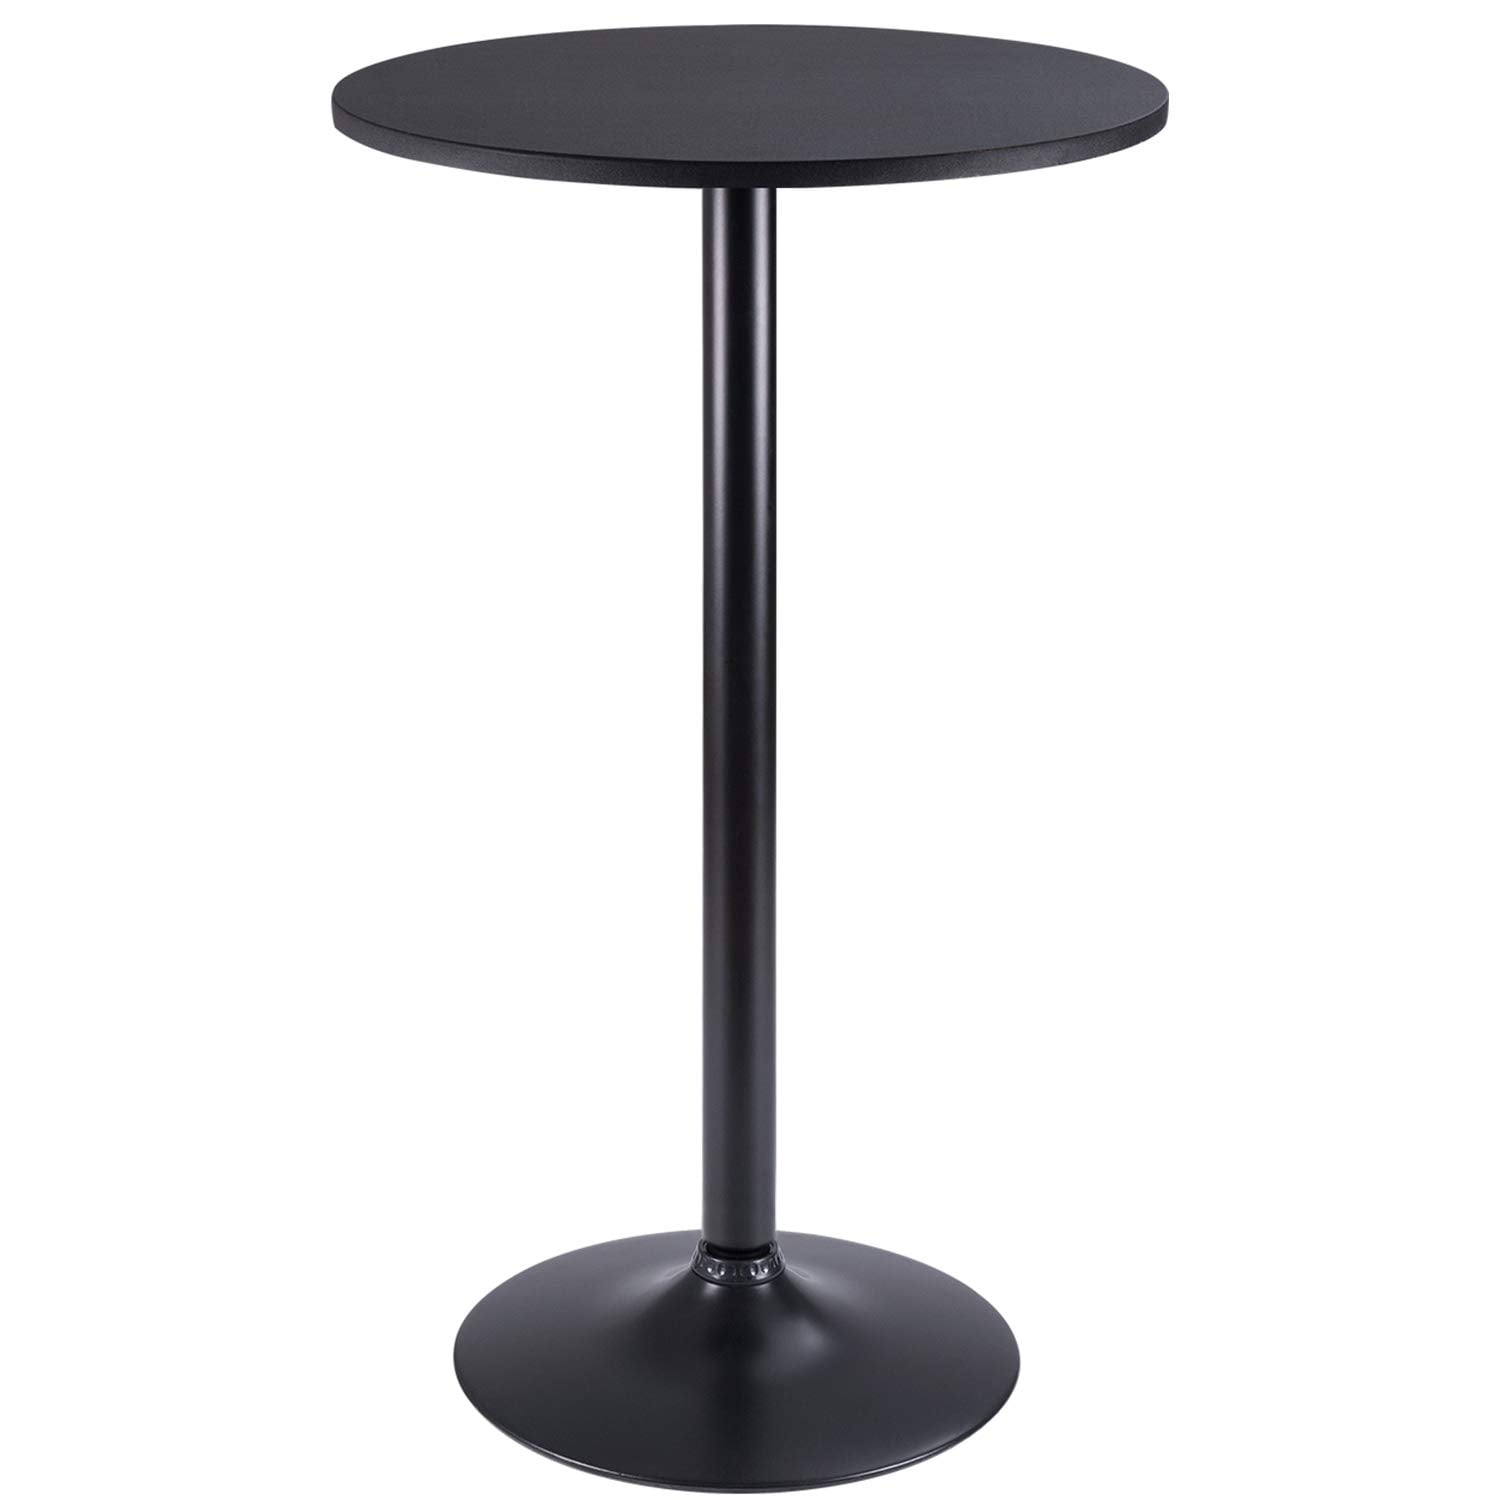 Details about   Flash Furniture 23.25" Round Aluminum Indoor-Outdoor Bar Height Table with Fl... 